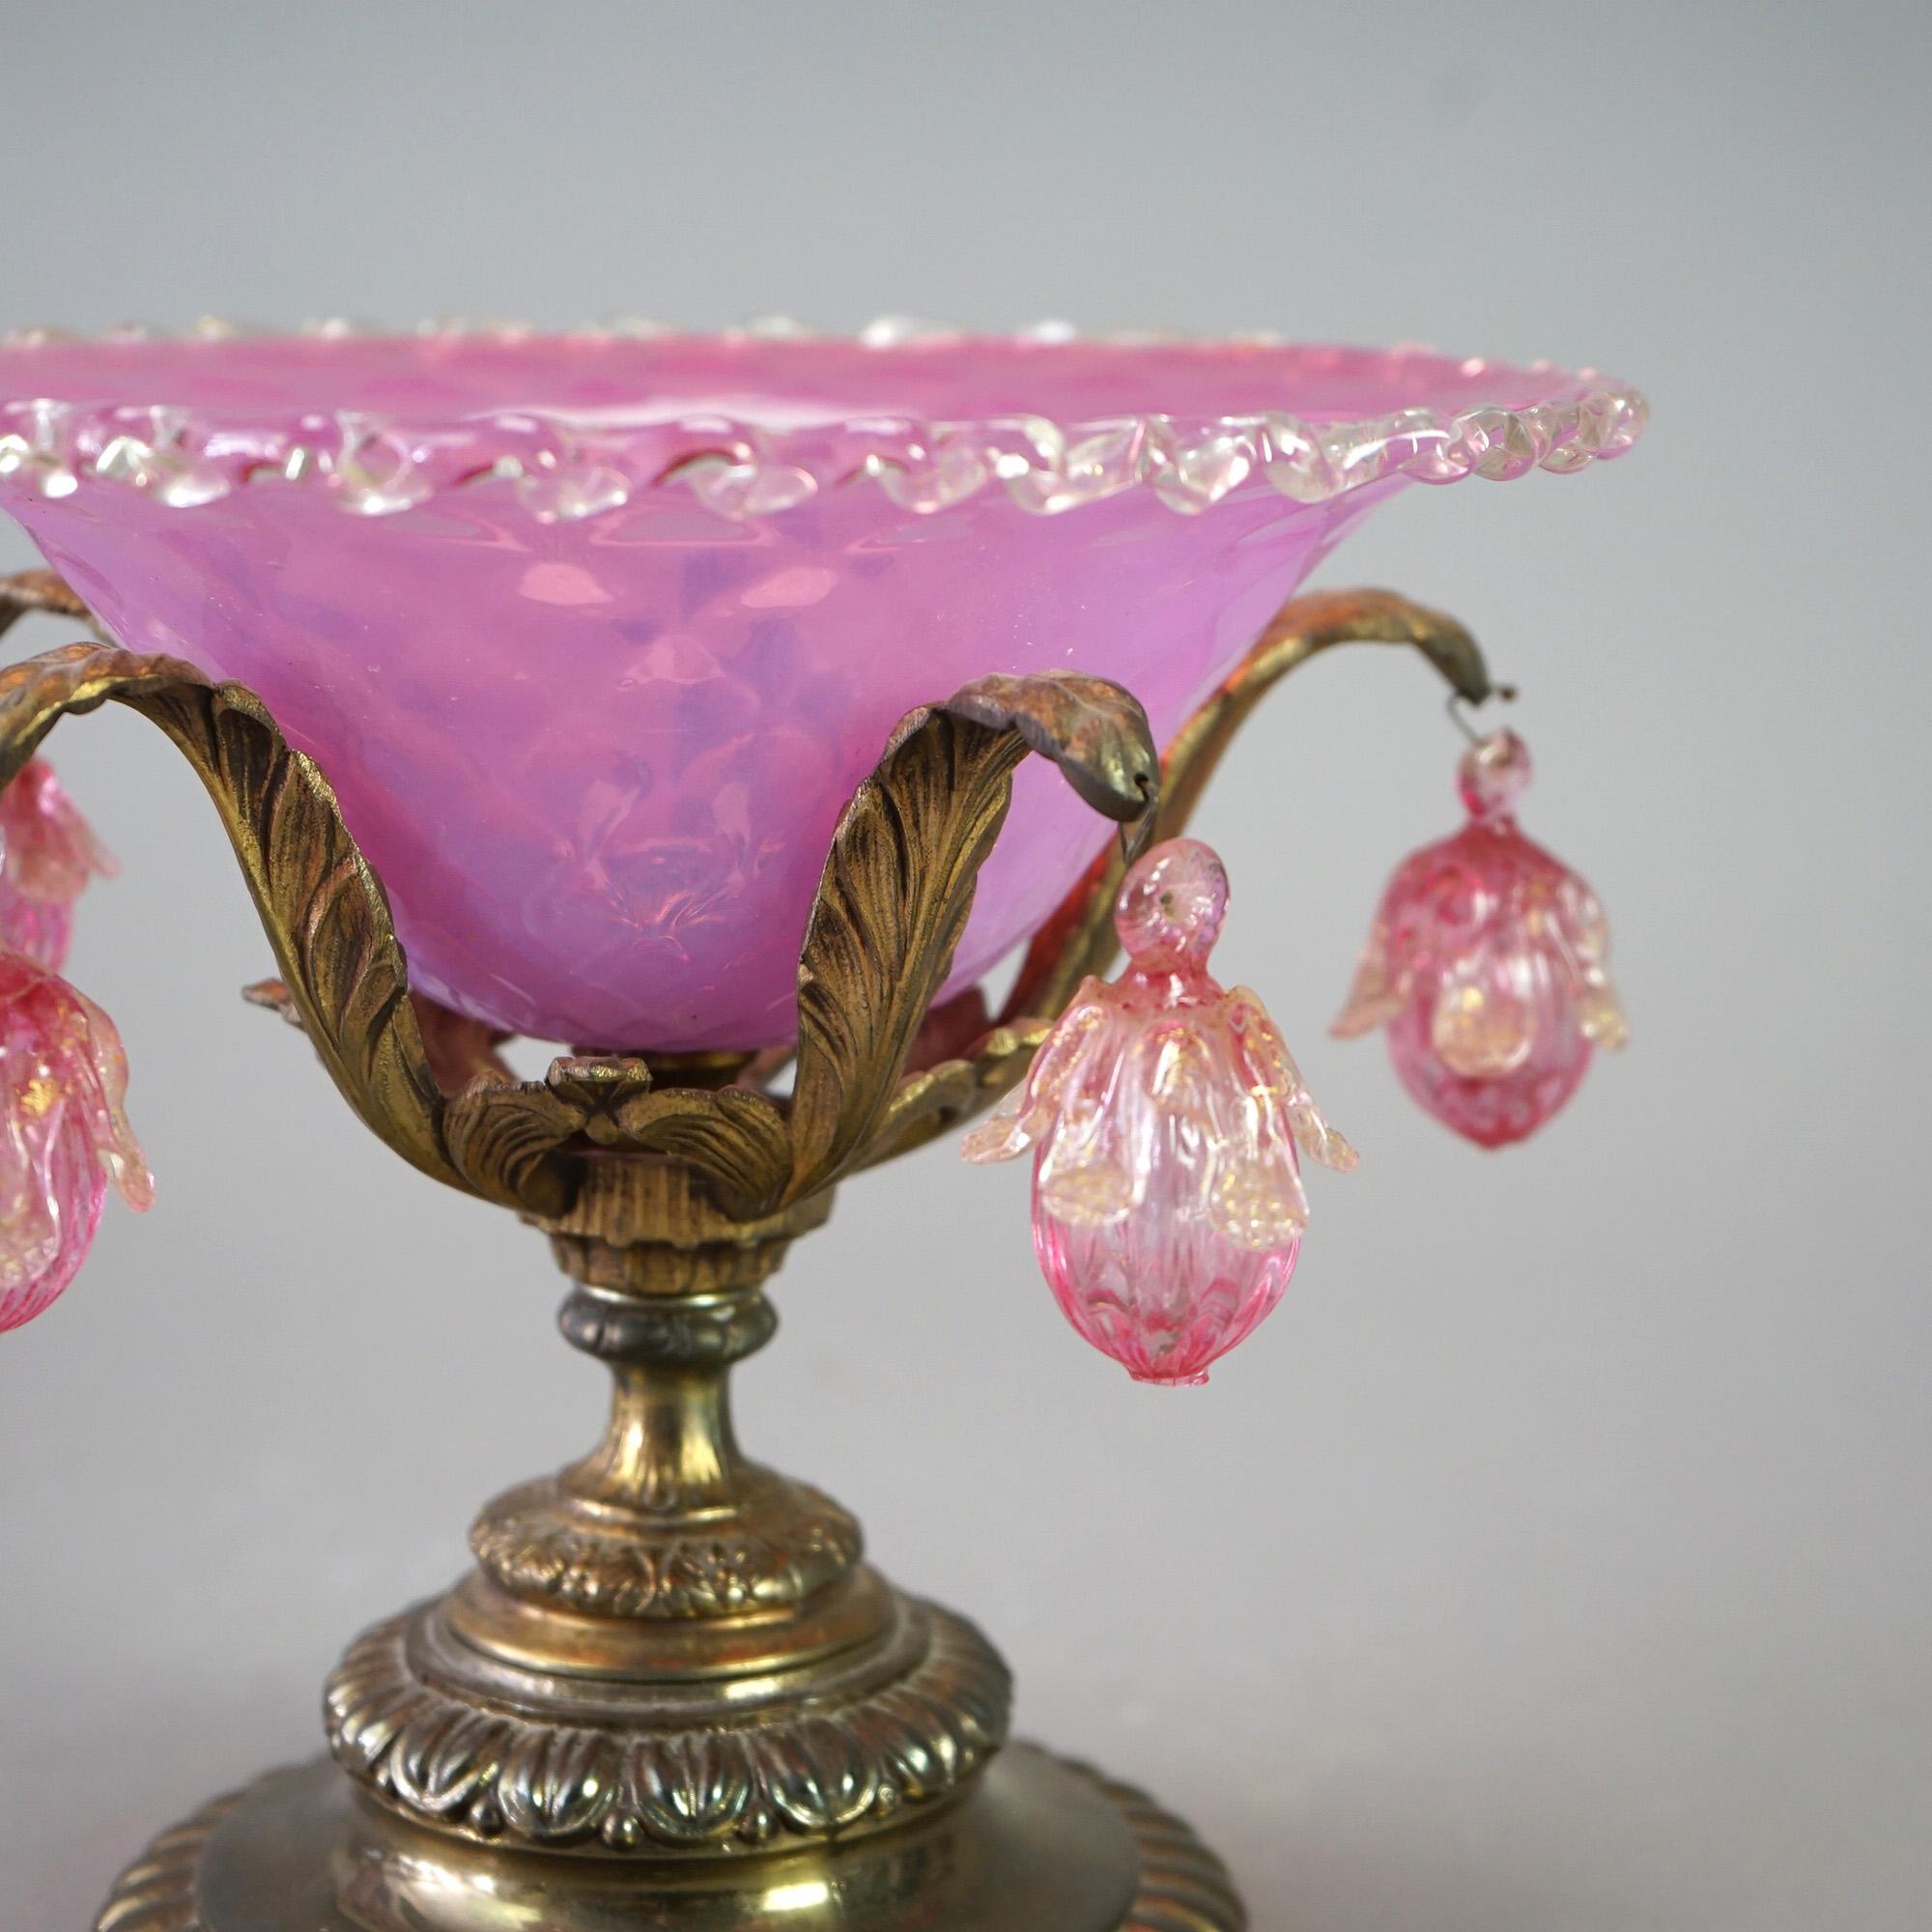 19th Century Antique Venetian Murano Pink Glass Compote with Blown Glass Ornaments C1890